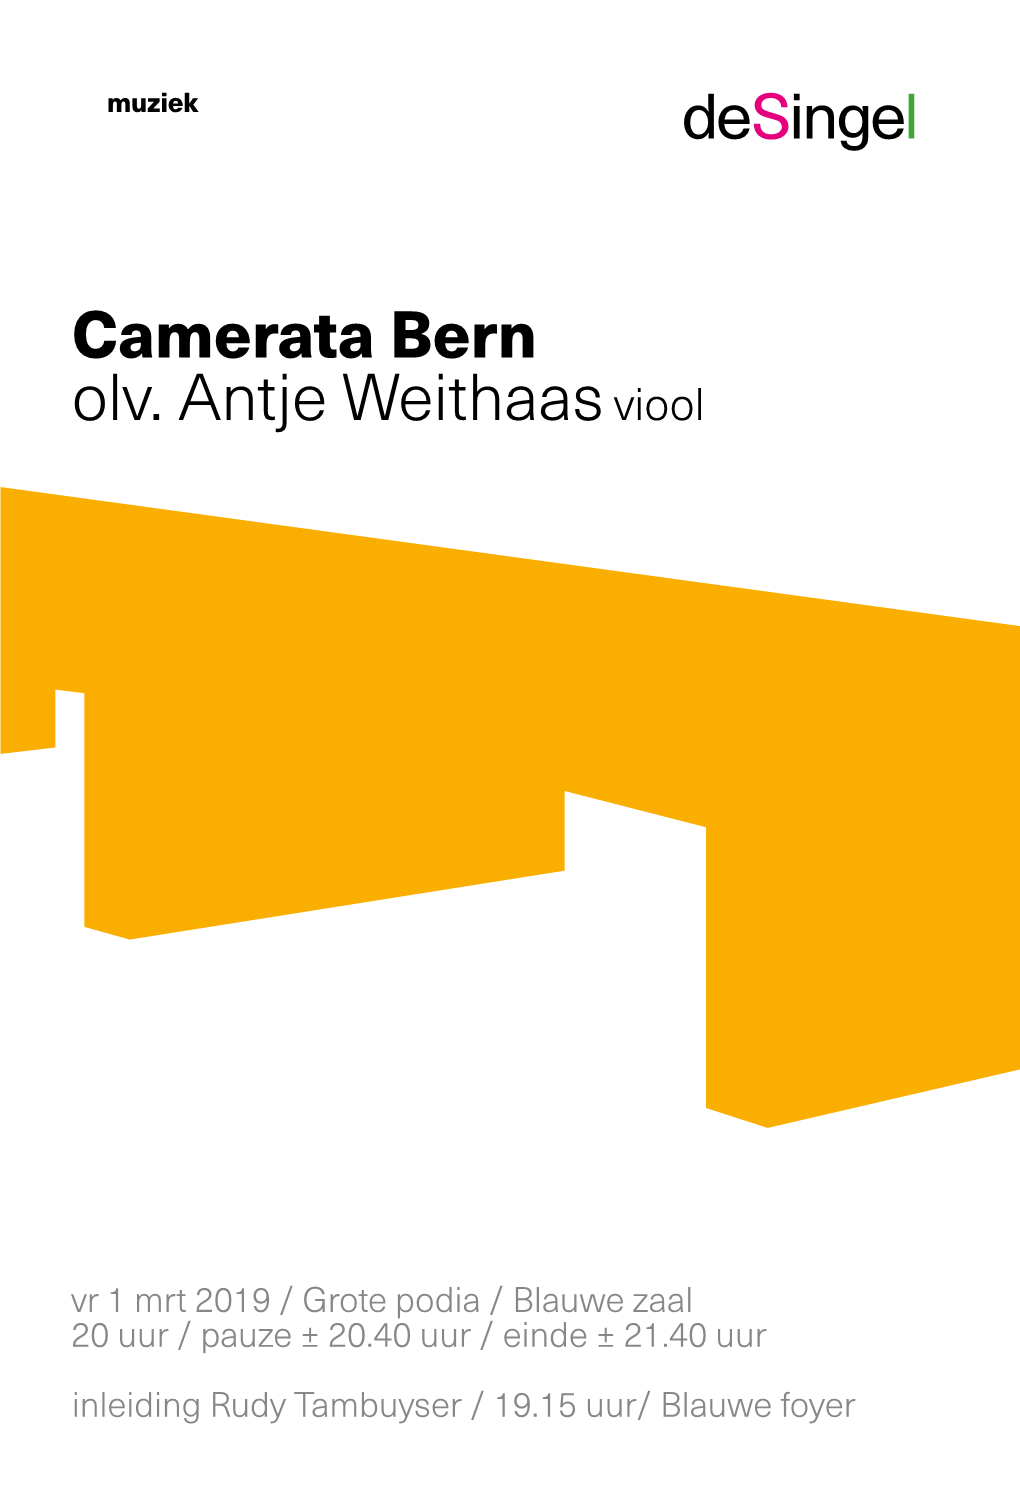 Camerata Bern Olv. Antje Weithaas Viool